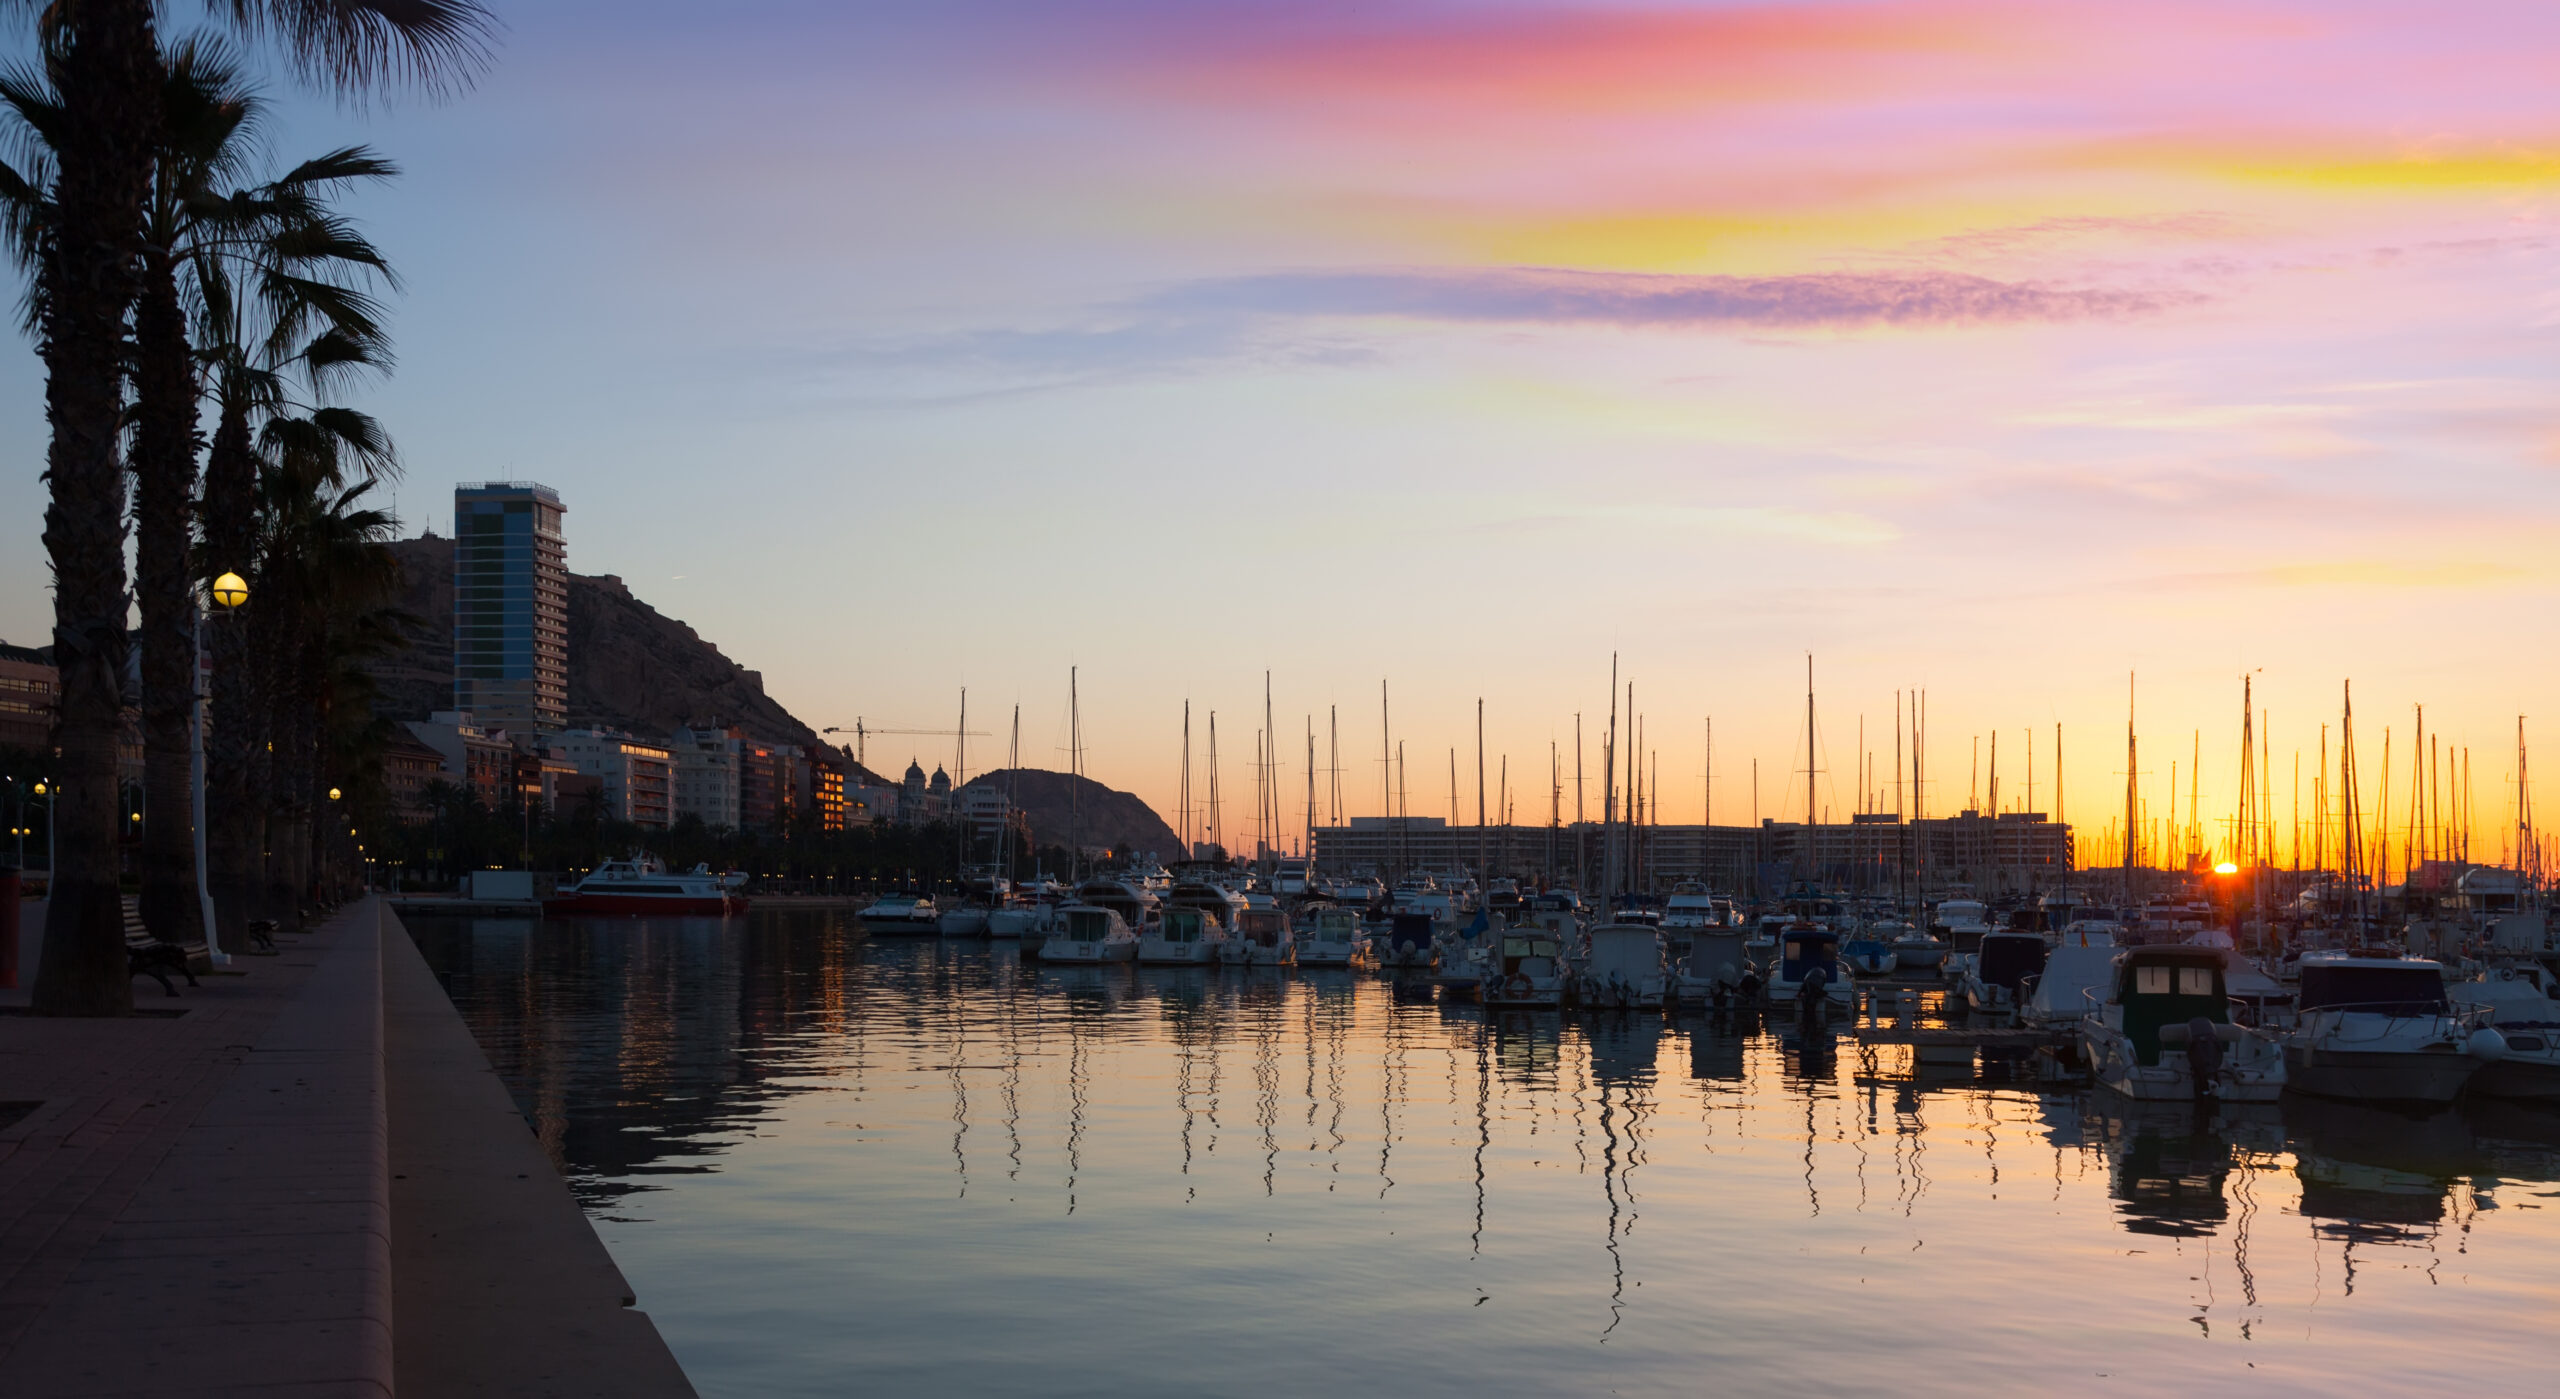 Port with yachts and embankment in sunrise. Alicante